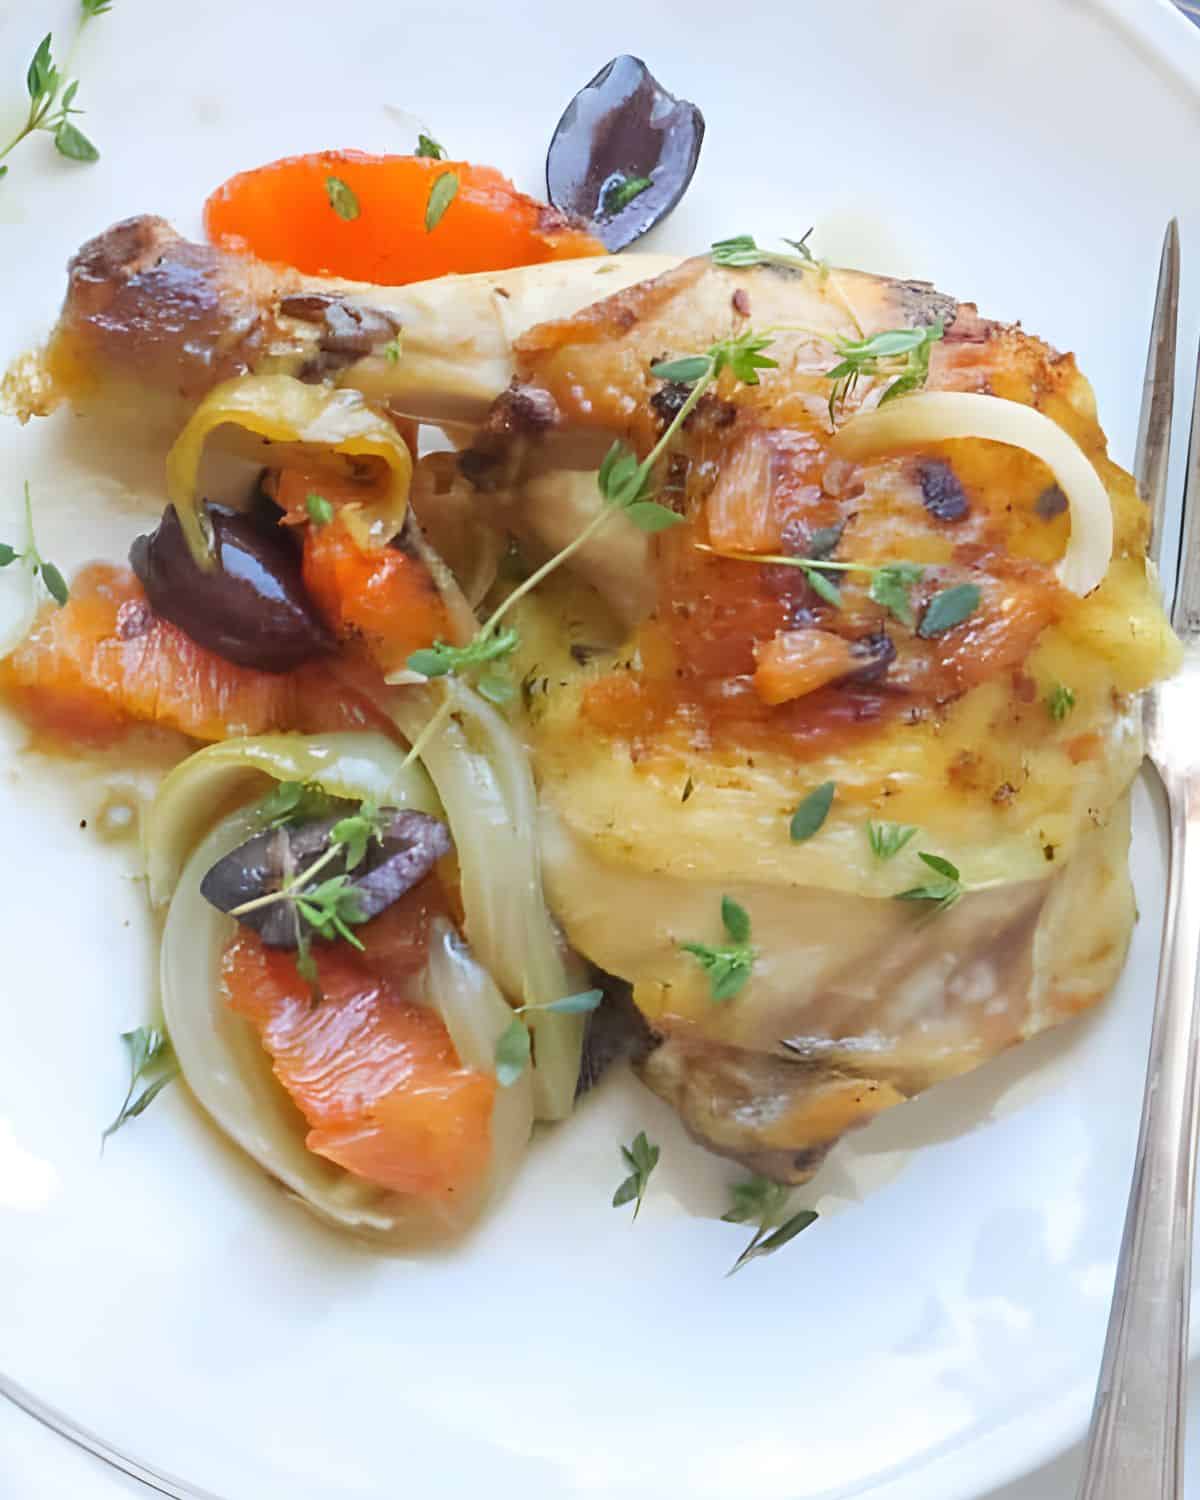 A roast spatchcock chicken leg with citrus and olives.